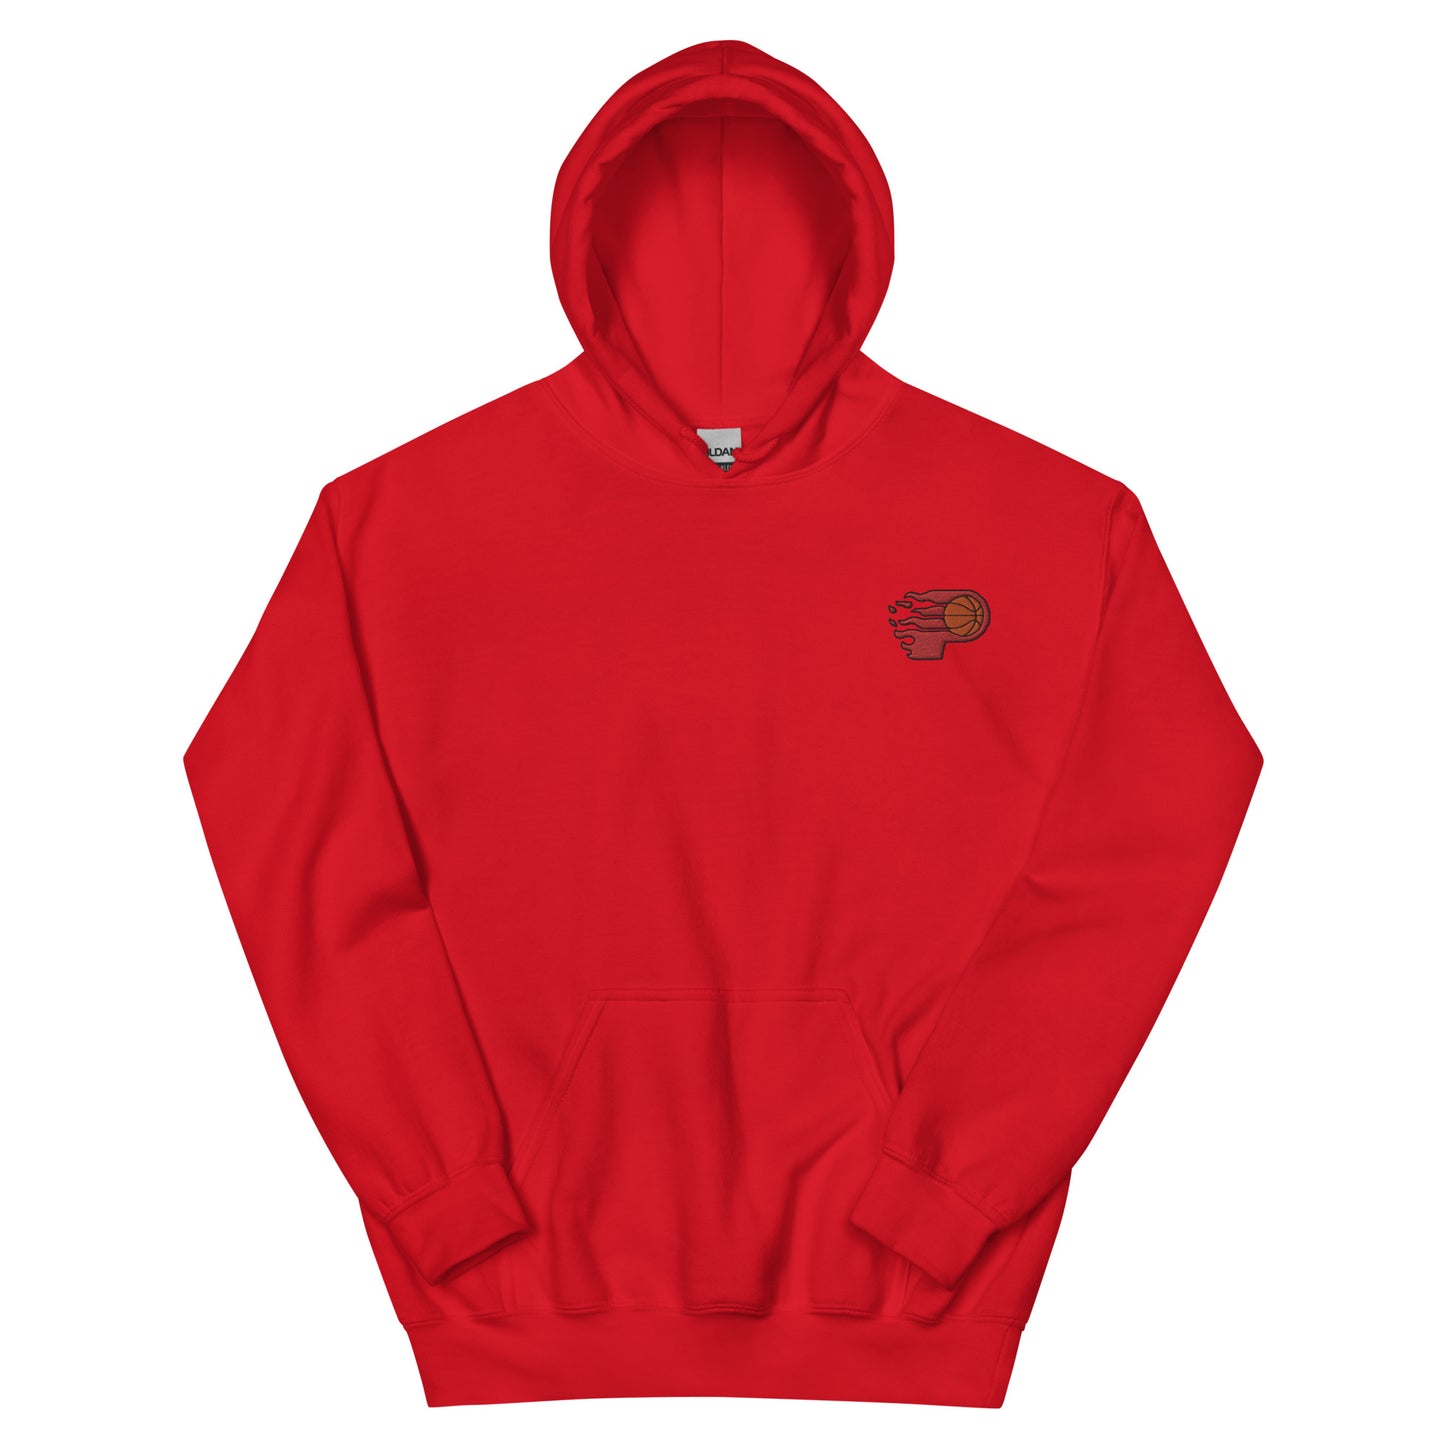 The Spicy P Hoodie